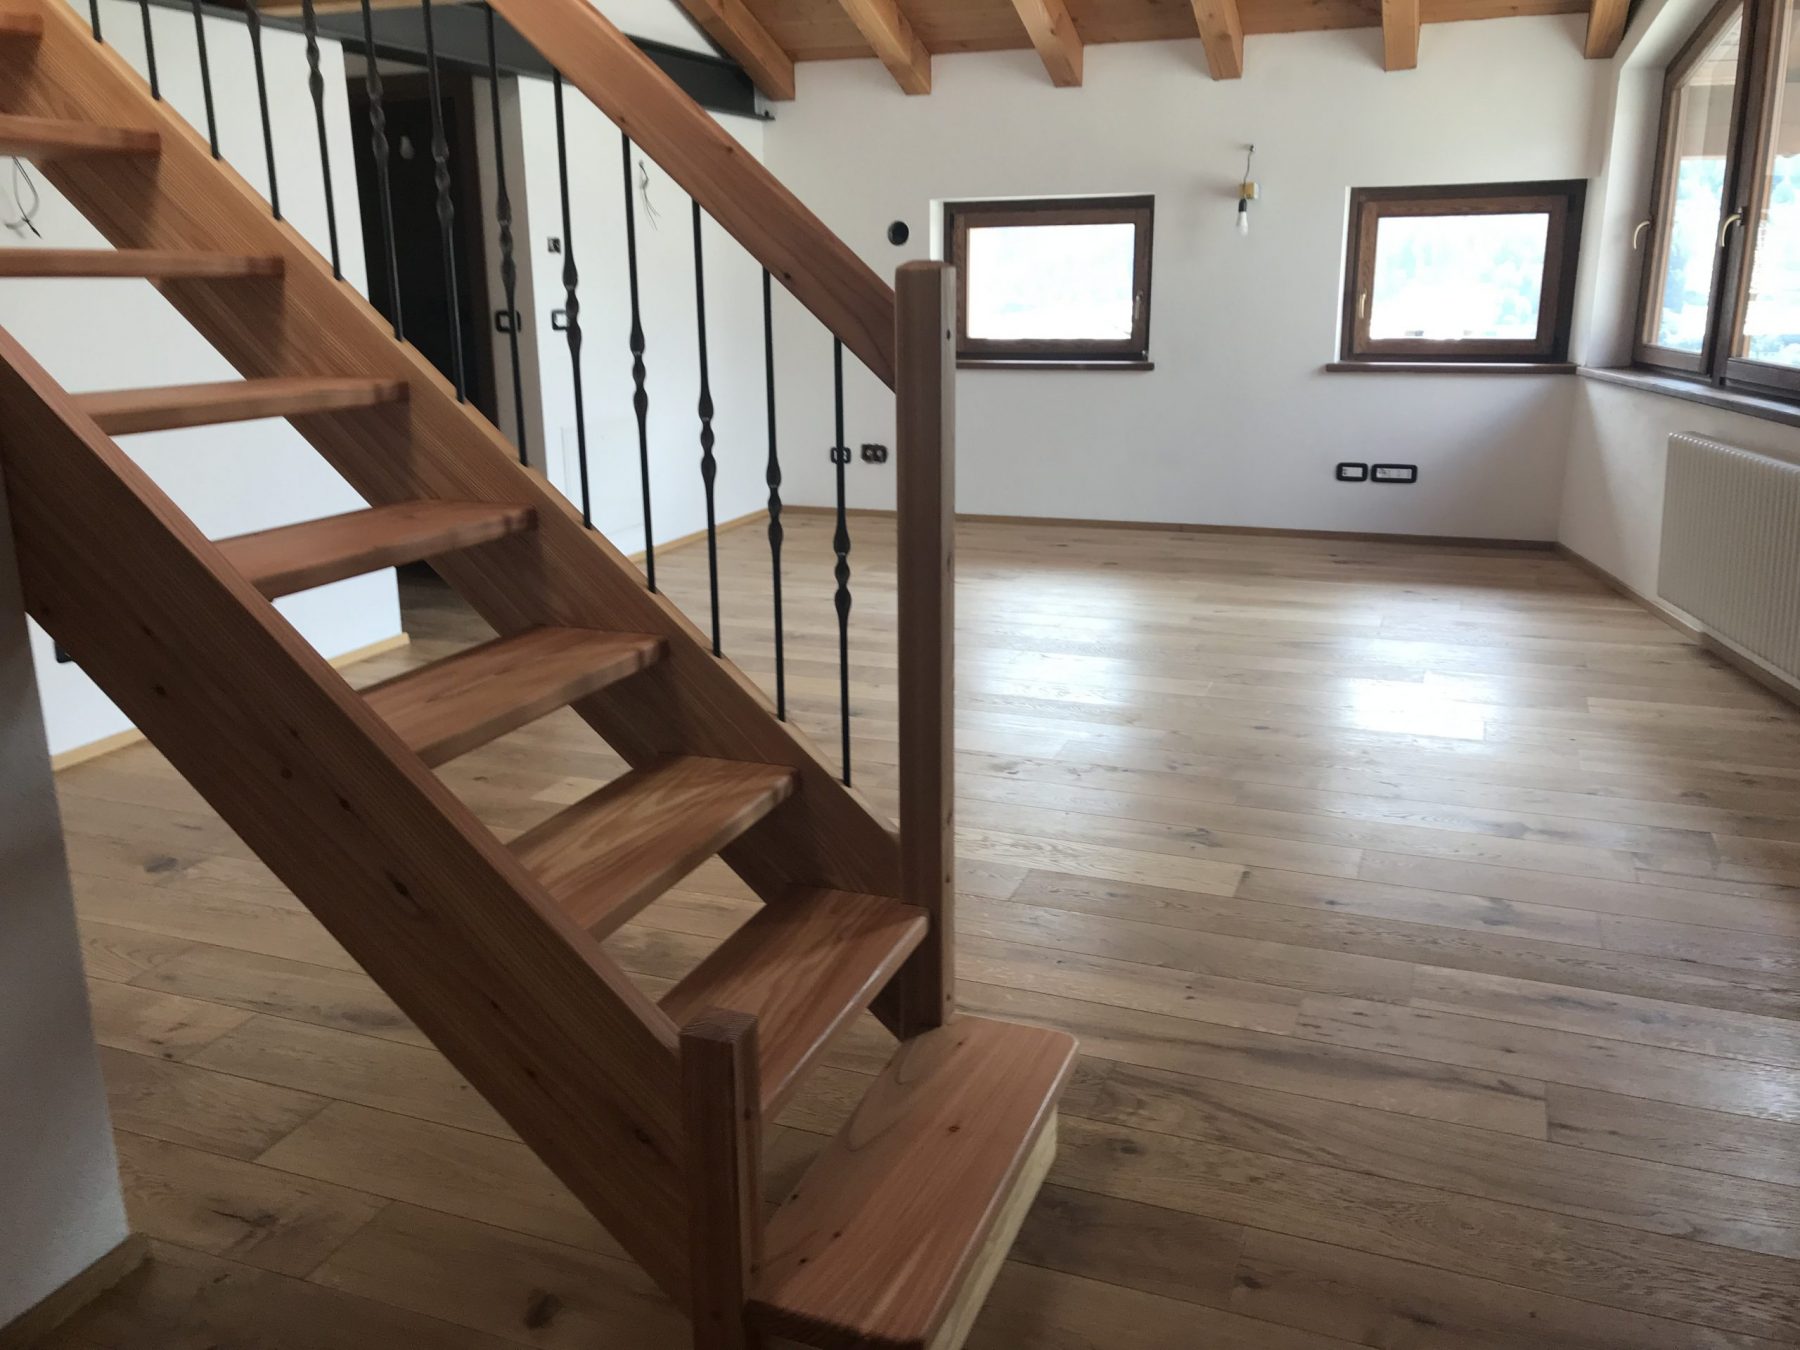 The flat of La Salle with three bedrooms, two bathrooms and a mezzanine. My experience of buying a home in the Italian Alps.